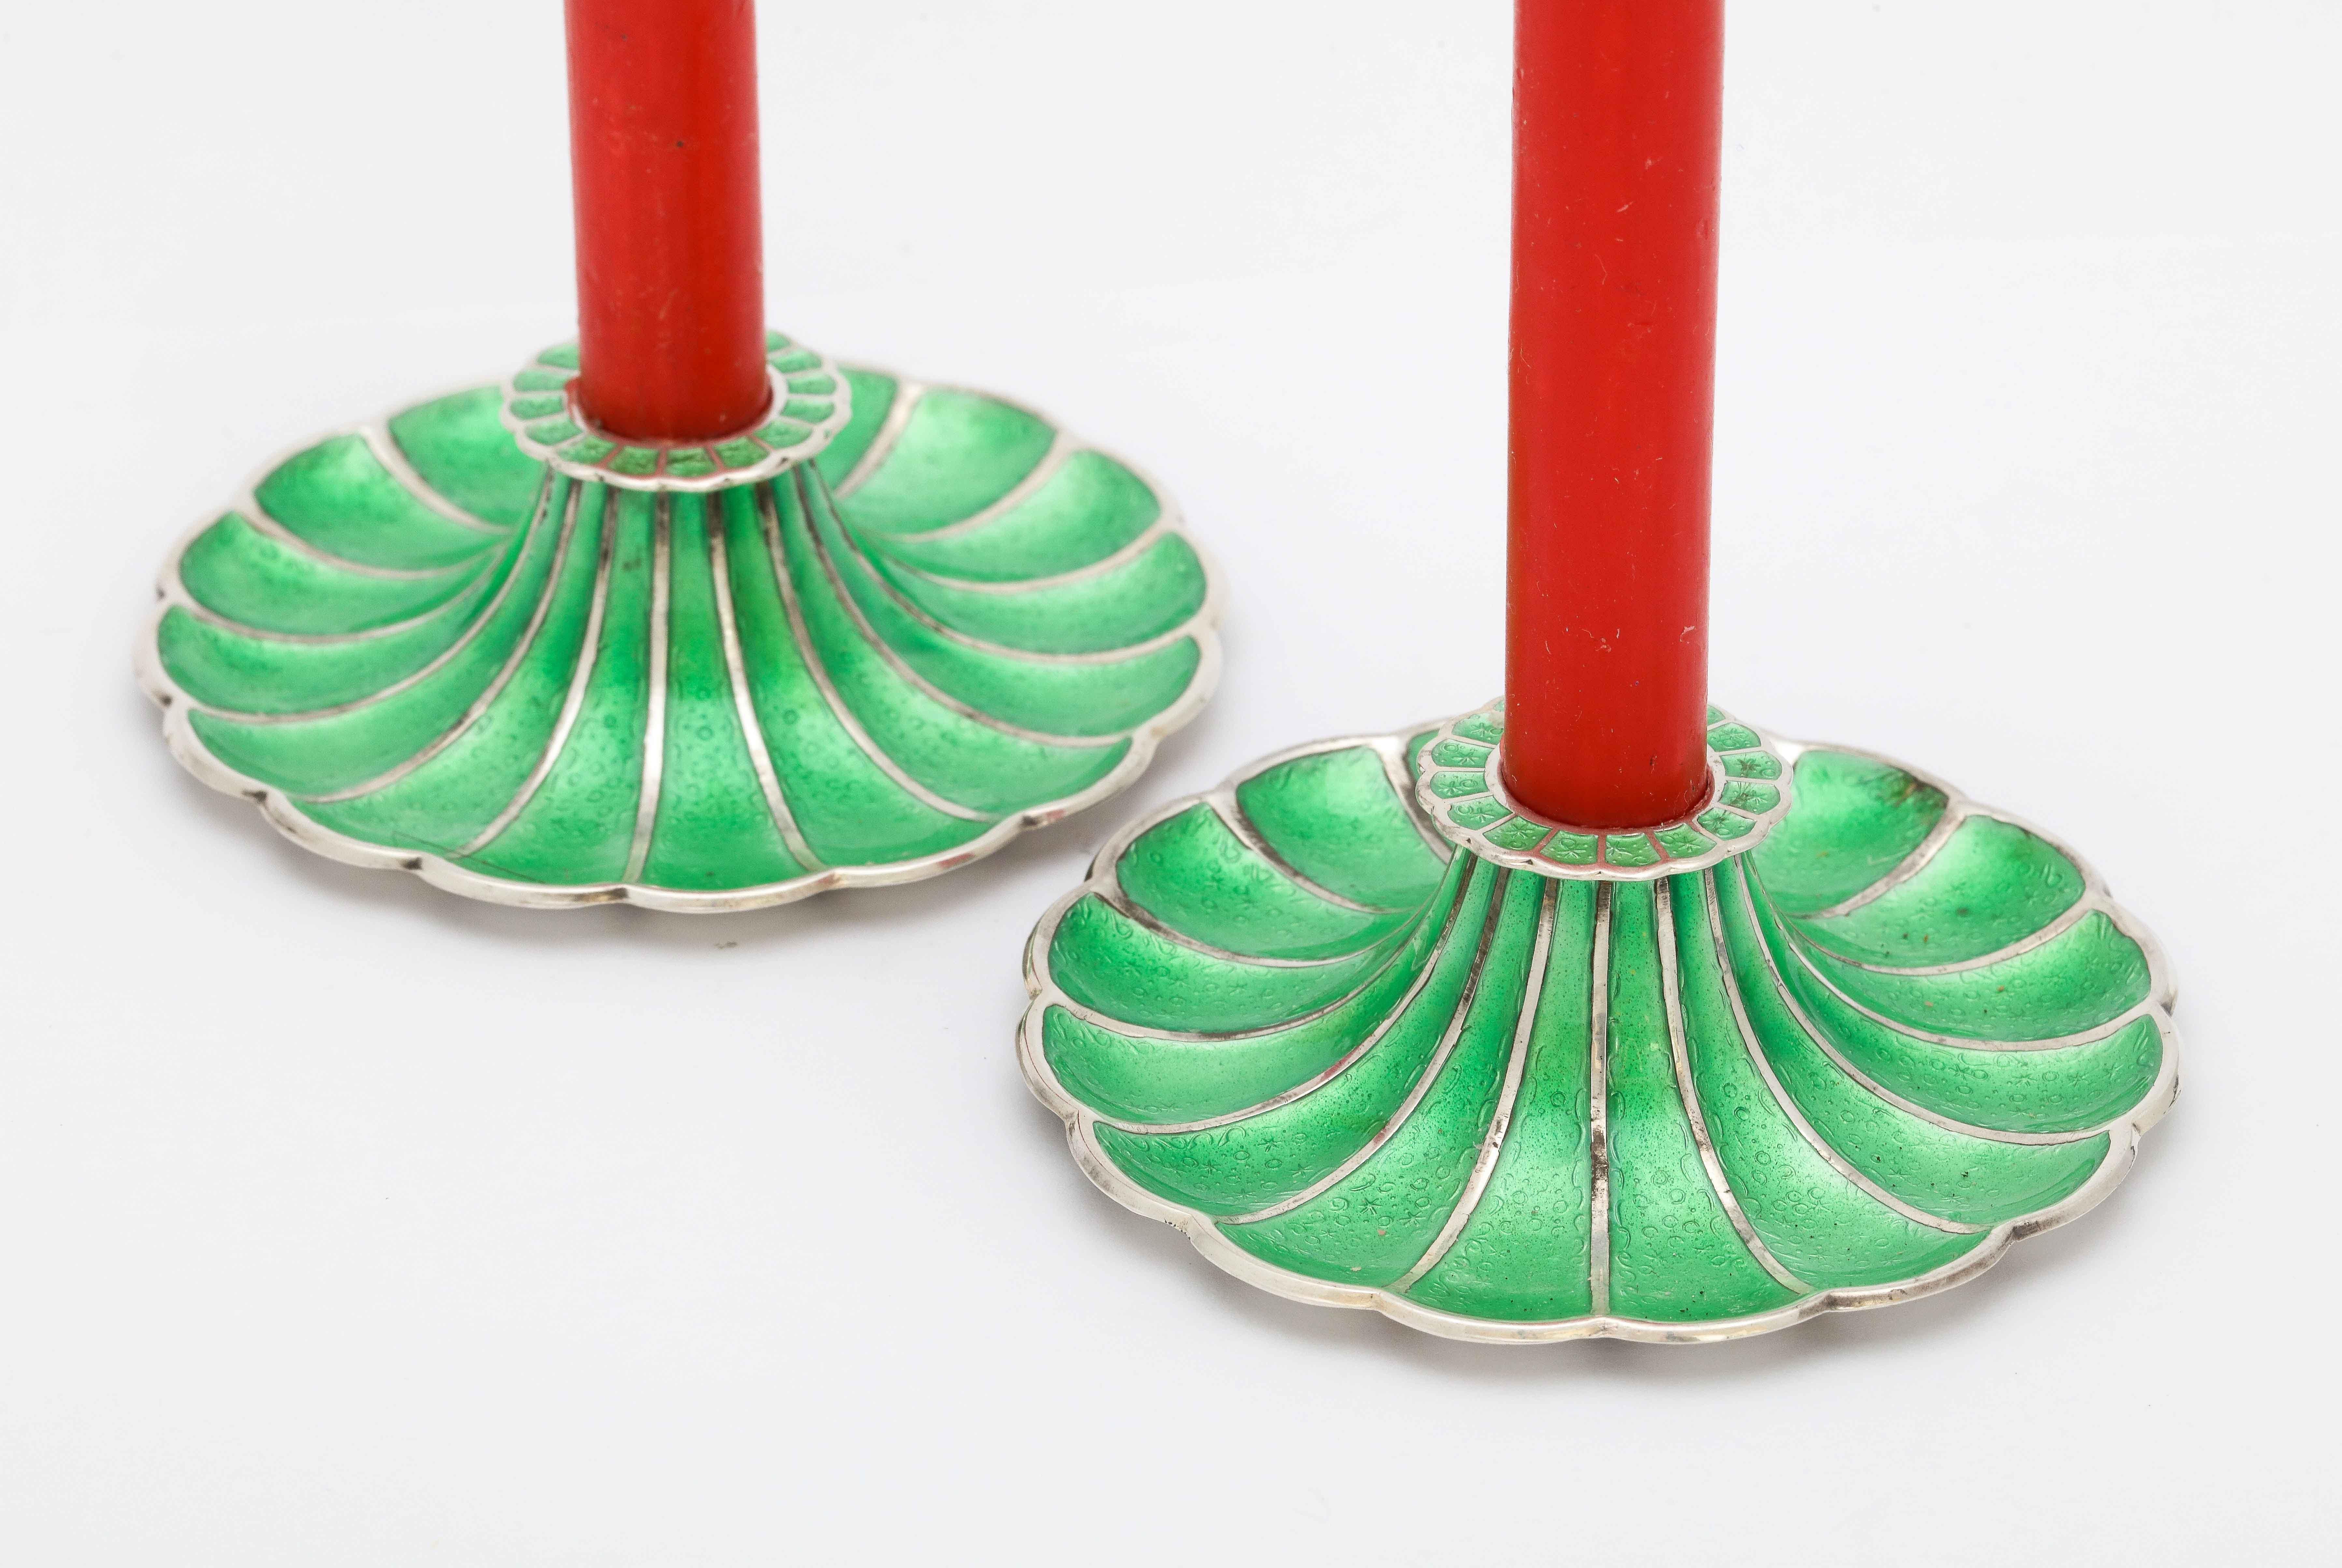 Danish Mid-Century Modern Pair of Sterling Silver and Green Enamel Candlesticks